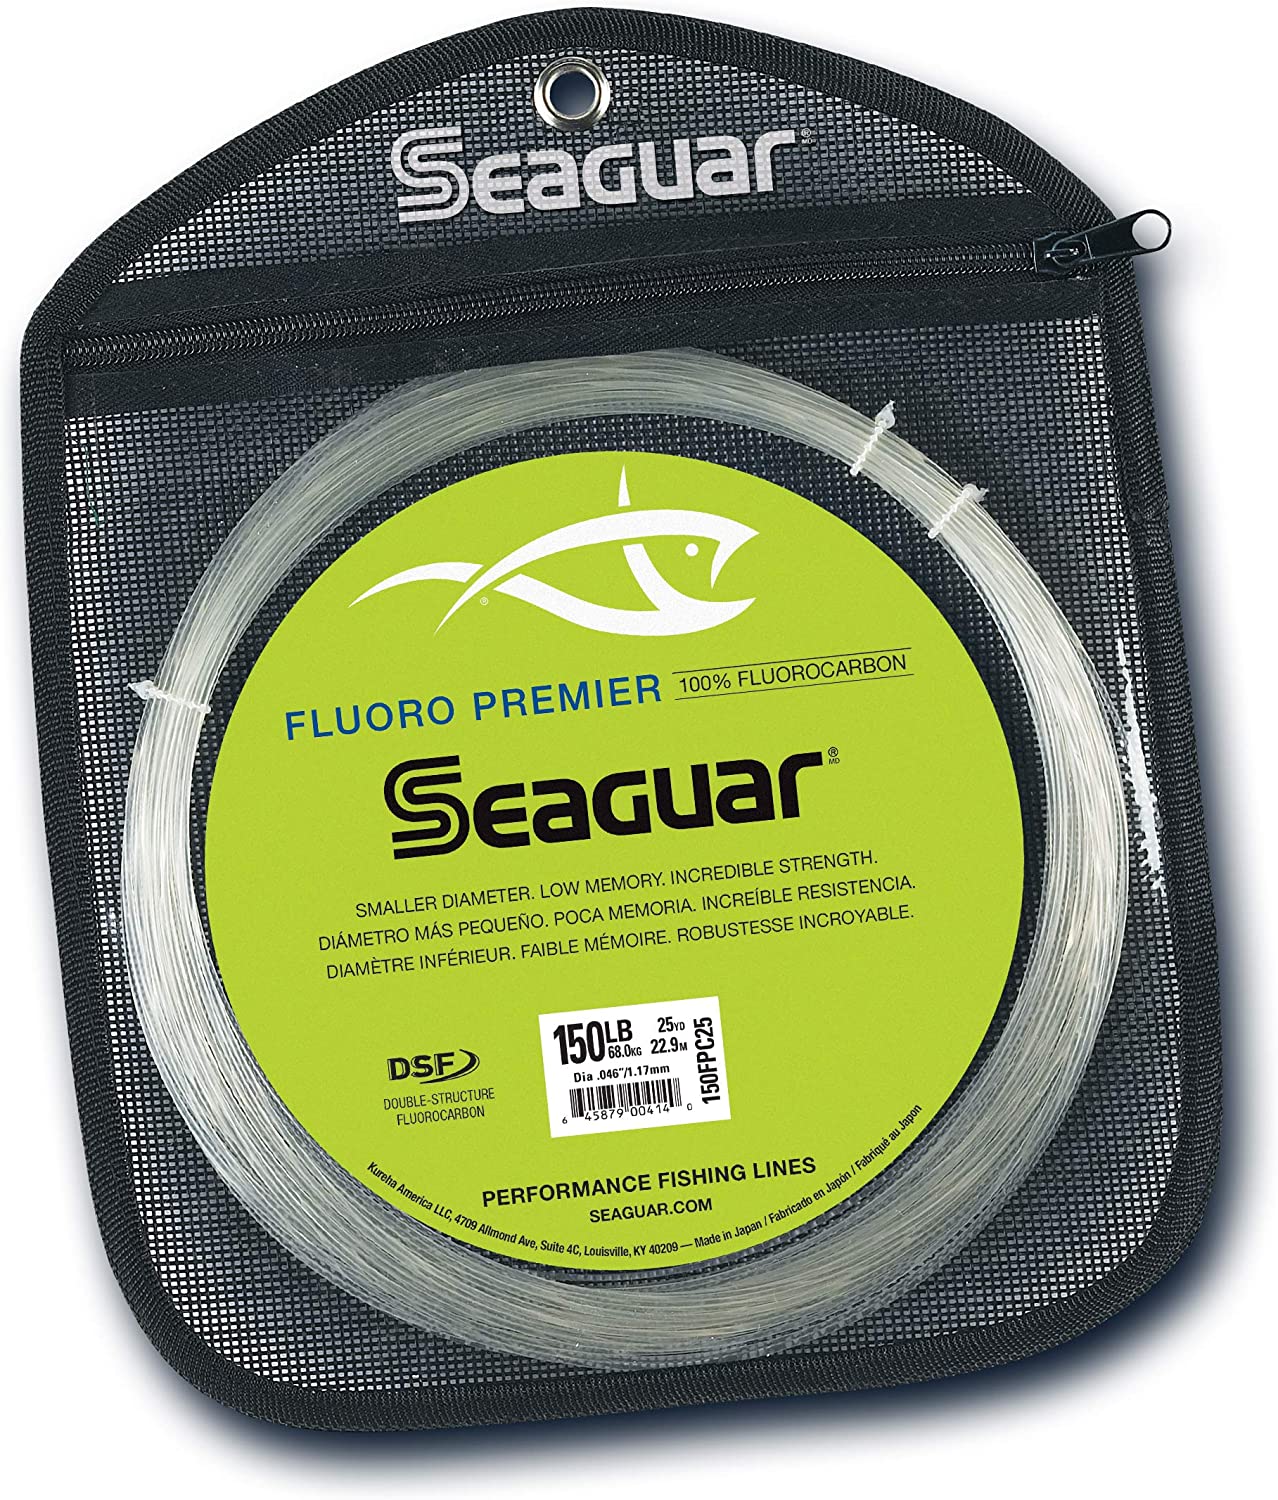 Seaguar Fluoro Premier 25 Yards Fluorocarbon Leader | Freshwater | Saltwater | Spin | Spinning | Big Game | Trout | Walleye | Largemouth Bass | Pike | Sea Bass | Squid